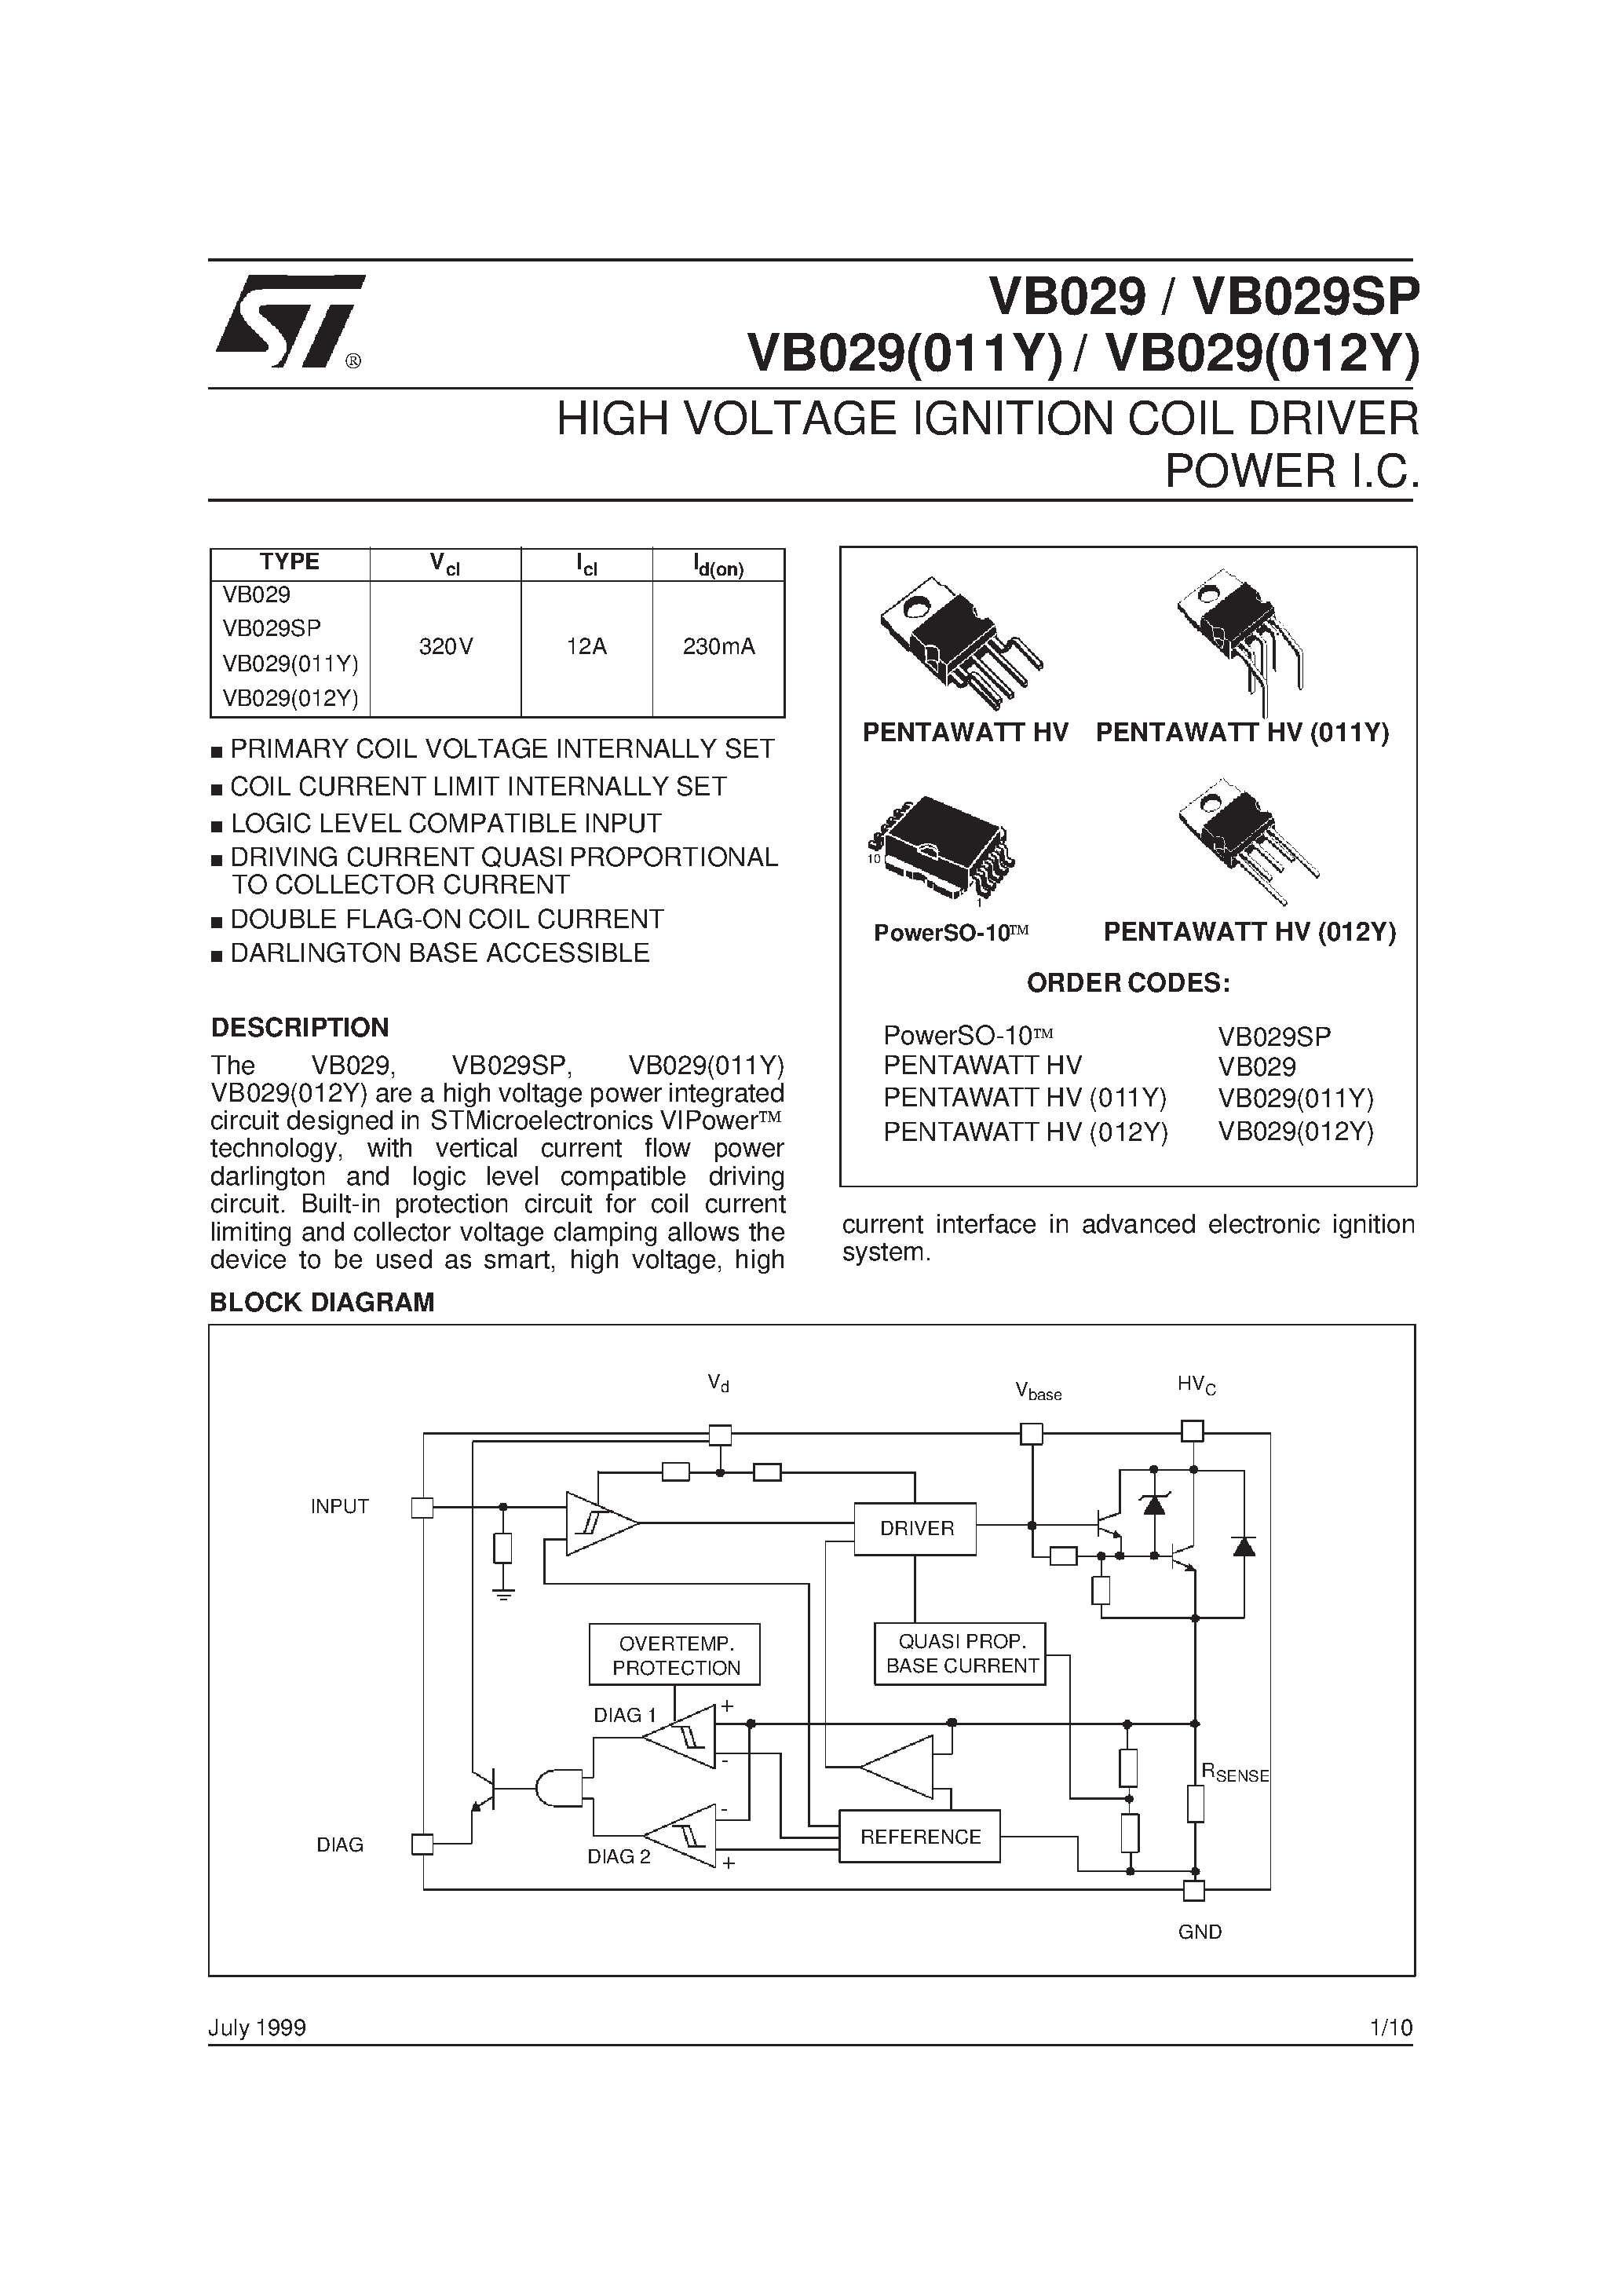 Datasheet VB029 - HIGH VOLTAGE IGNITION COIL DRIVER POWER I.C. page 1